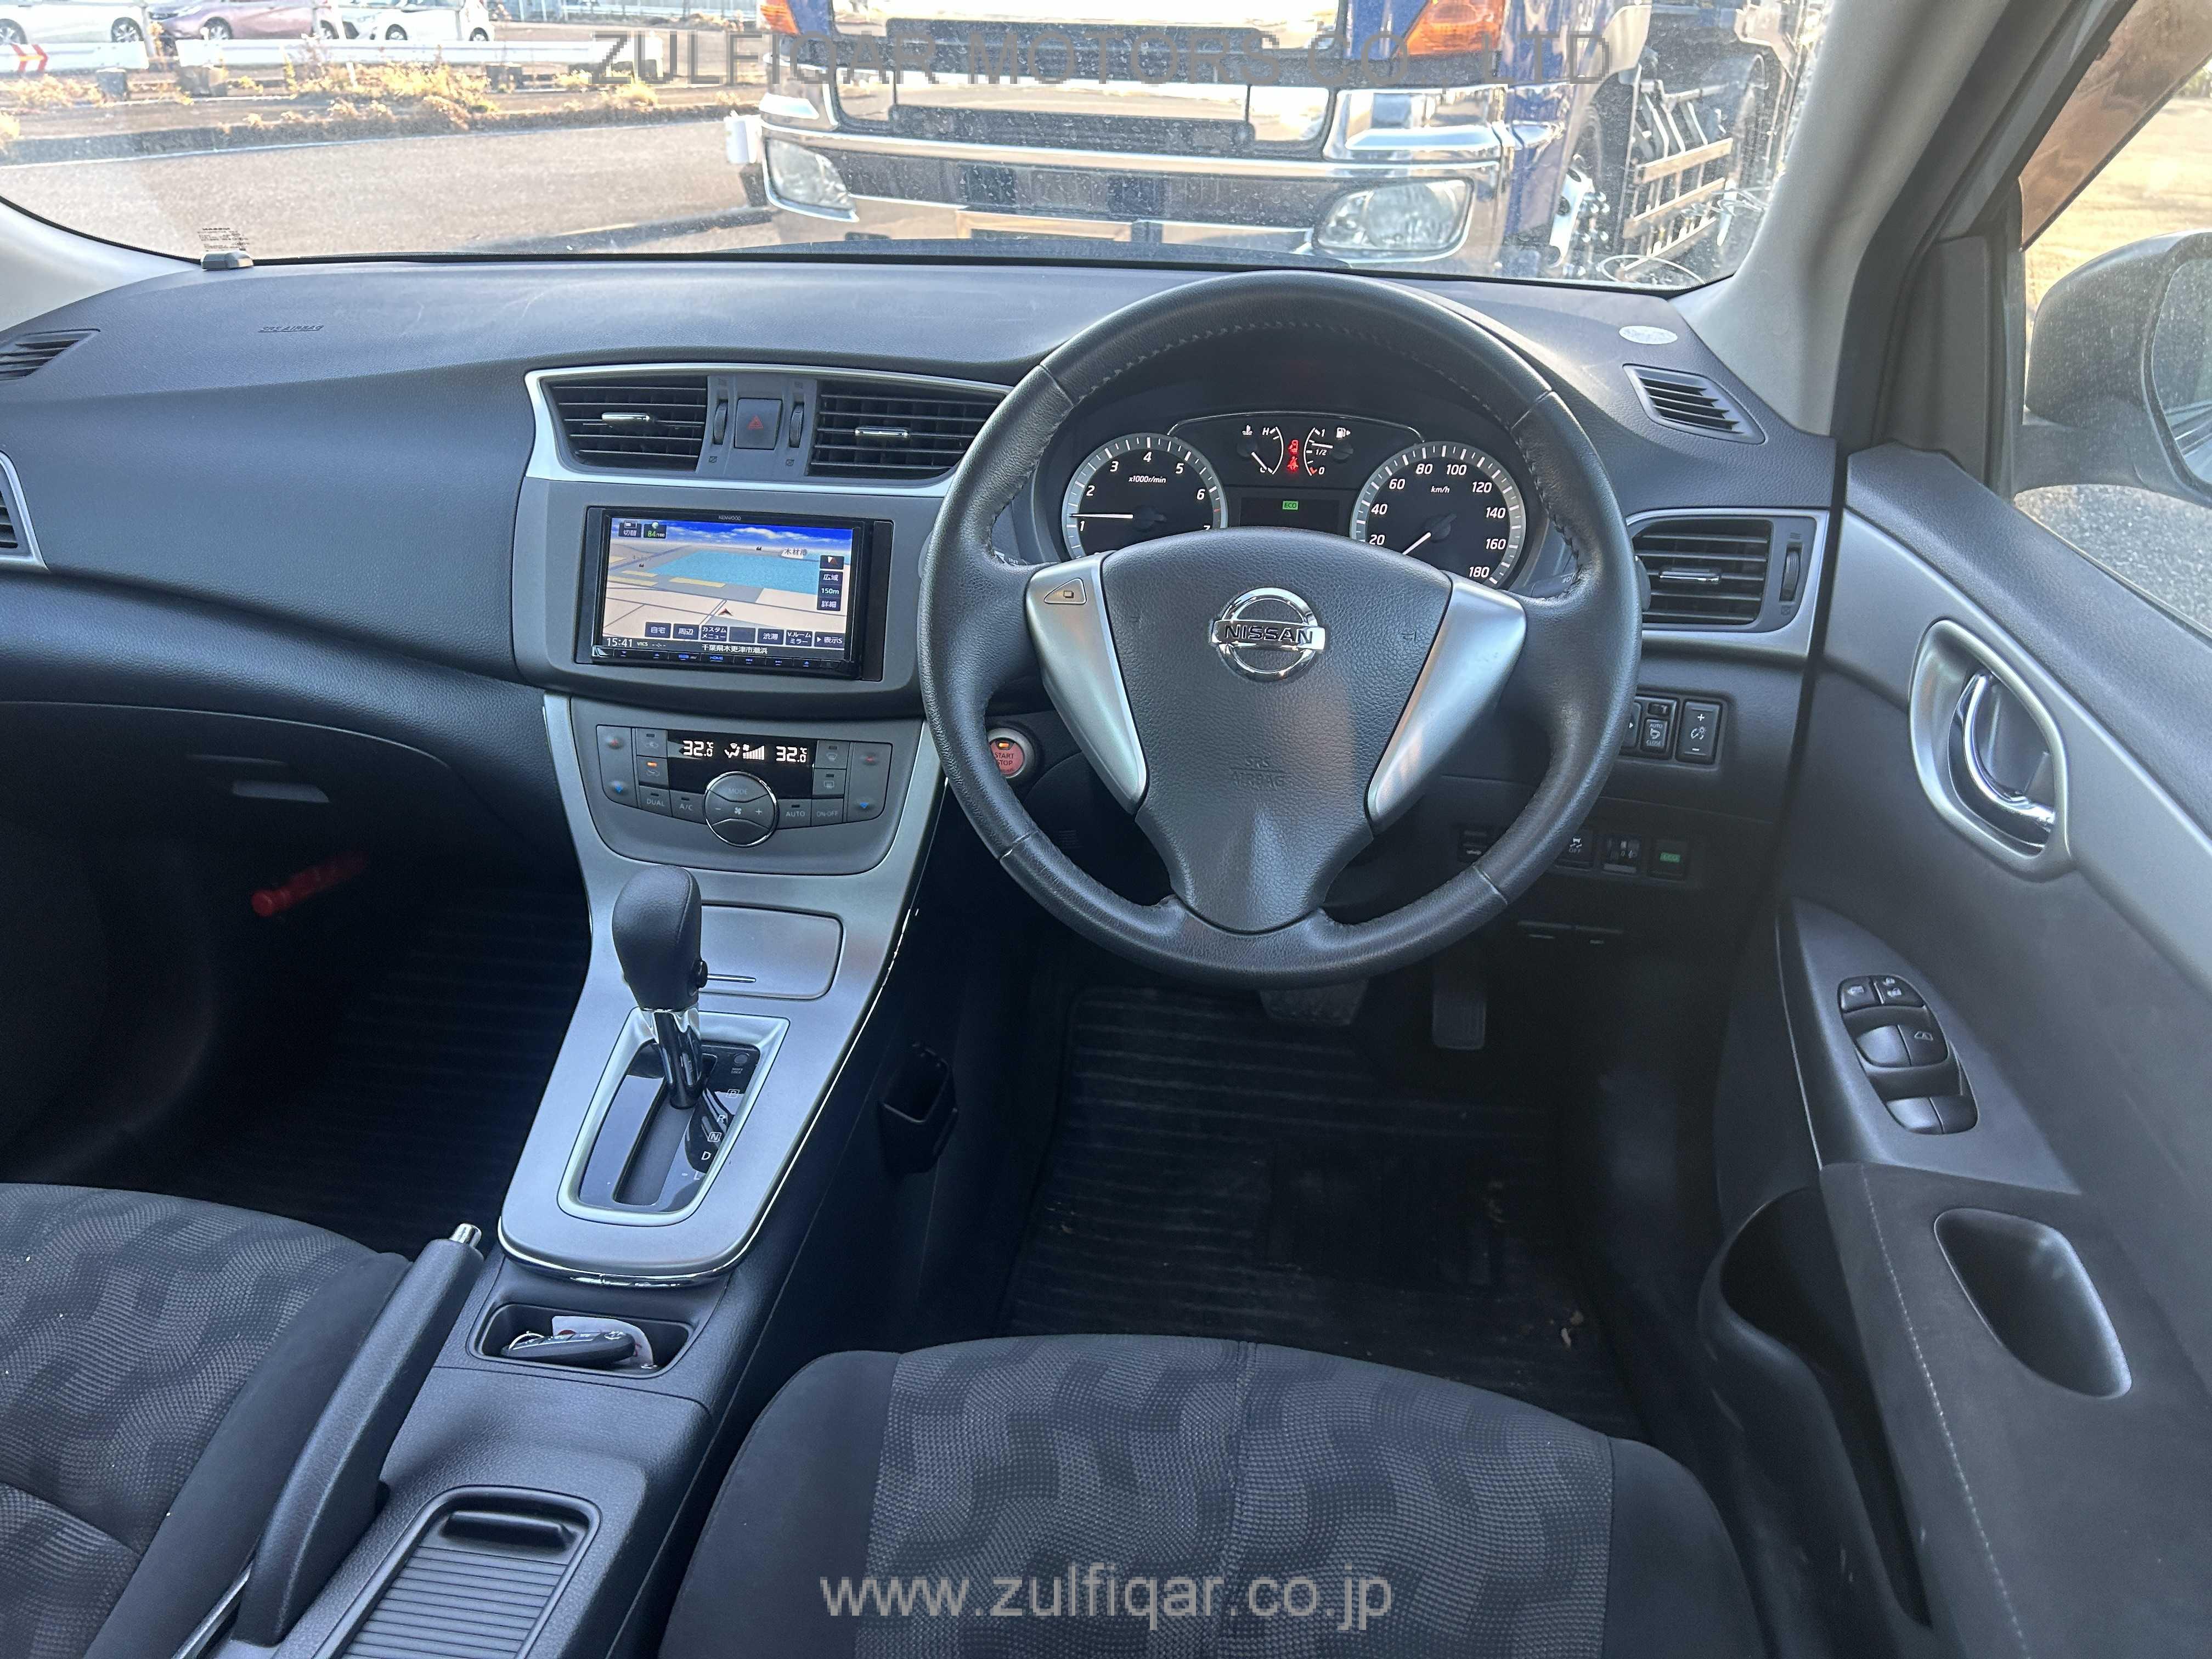 NISSAN SYLPHY 2020 Image 22